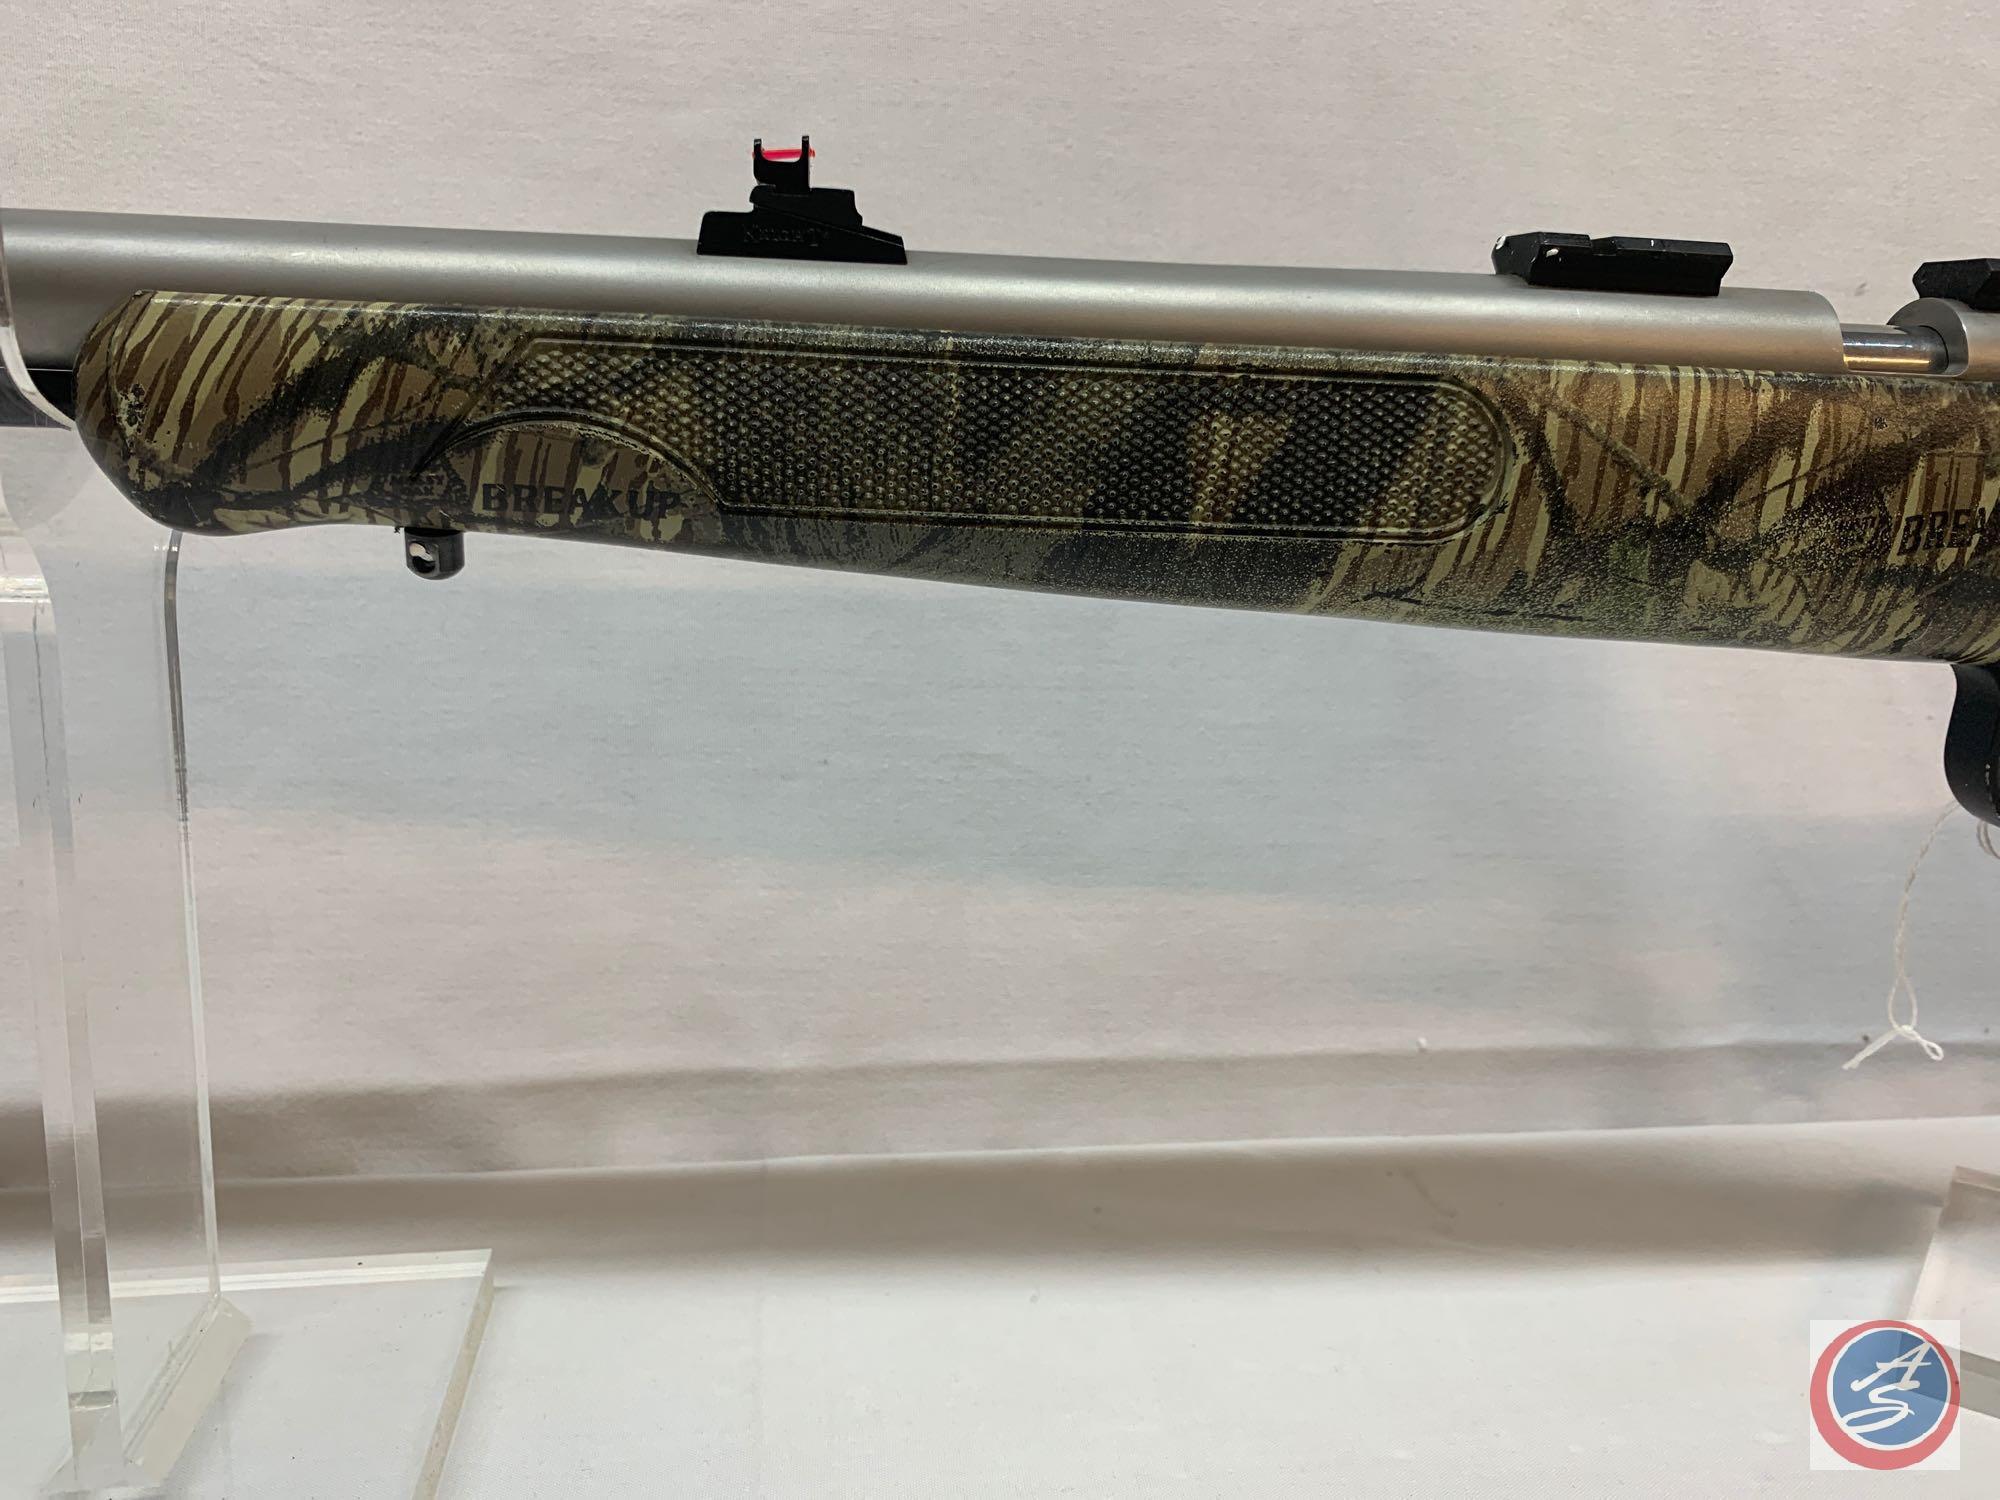 Knight Model...Rifle 50 Other Black Powder Muzzle Loader with Mossy Oak Camo and SS Barrel (No FFL